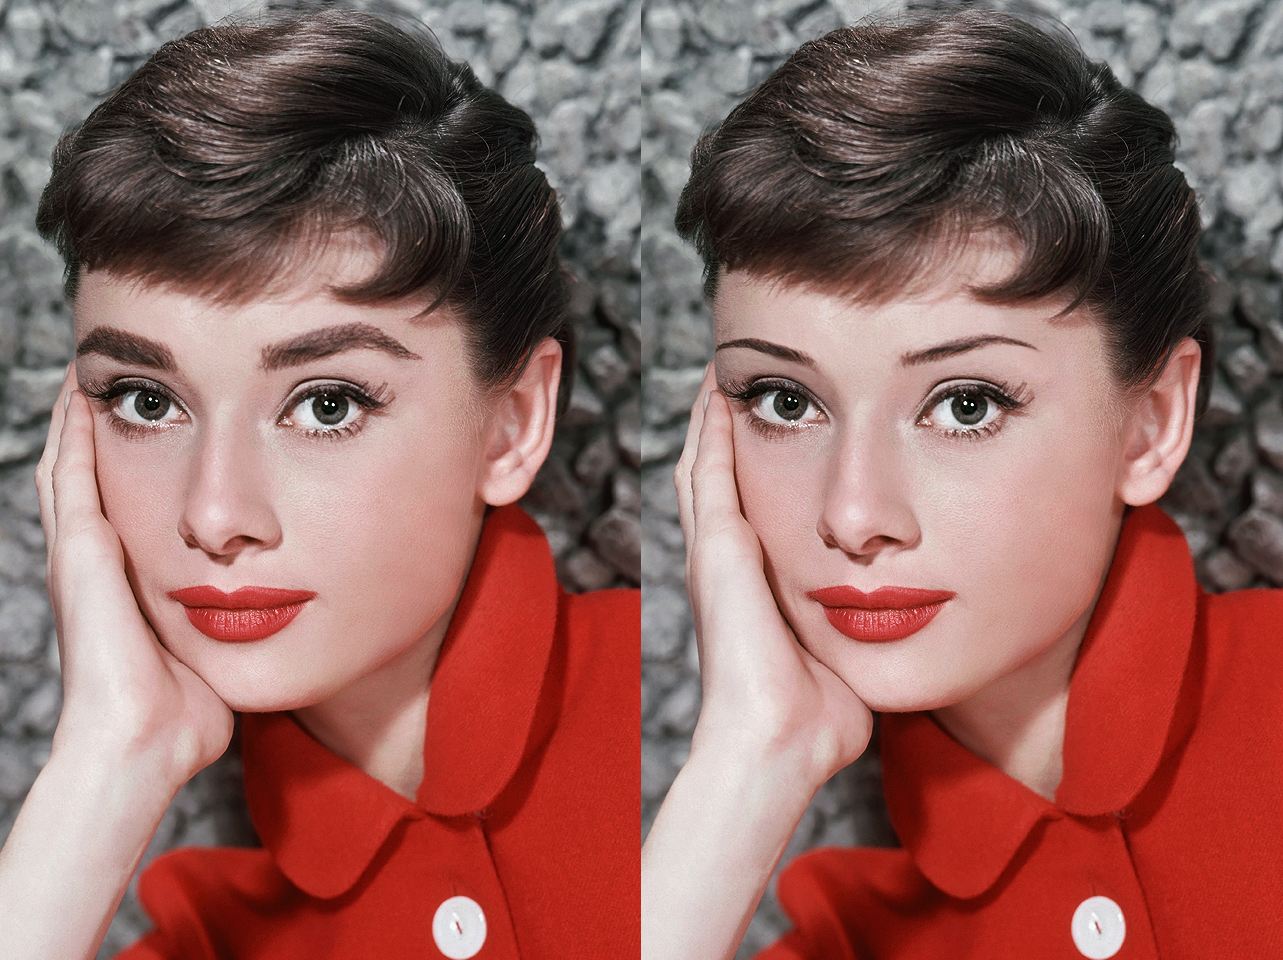 Audrey Hepburn's signature brows from the 1950s vs a digitally edited thin-brow look | Source: Getty Images